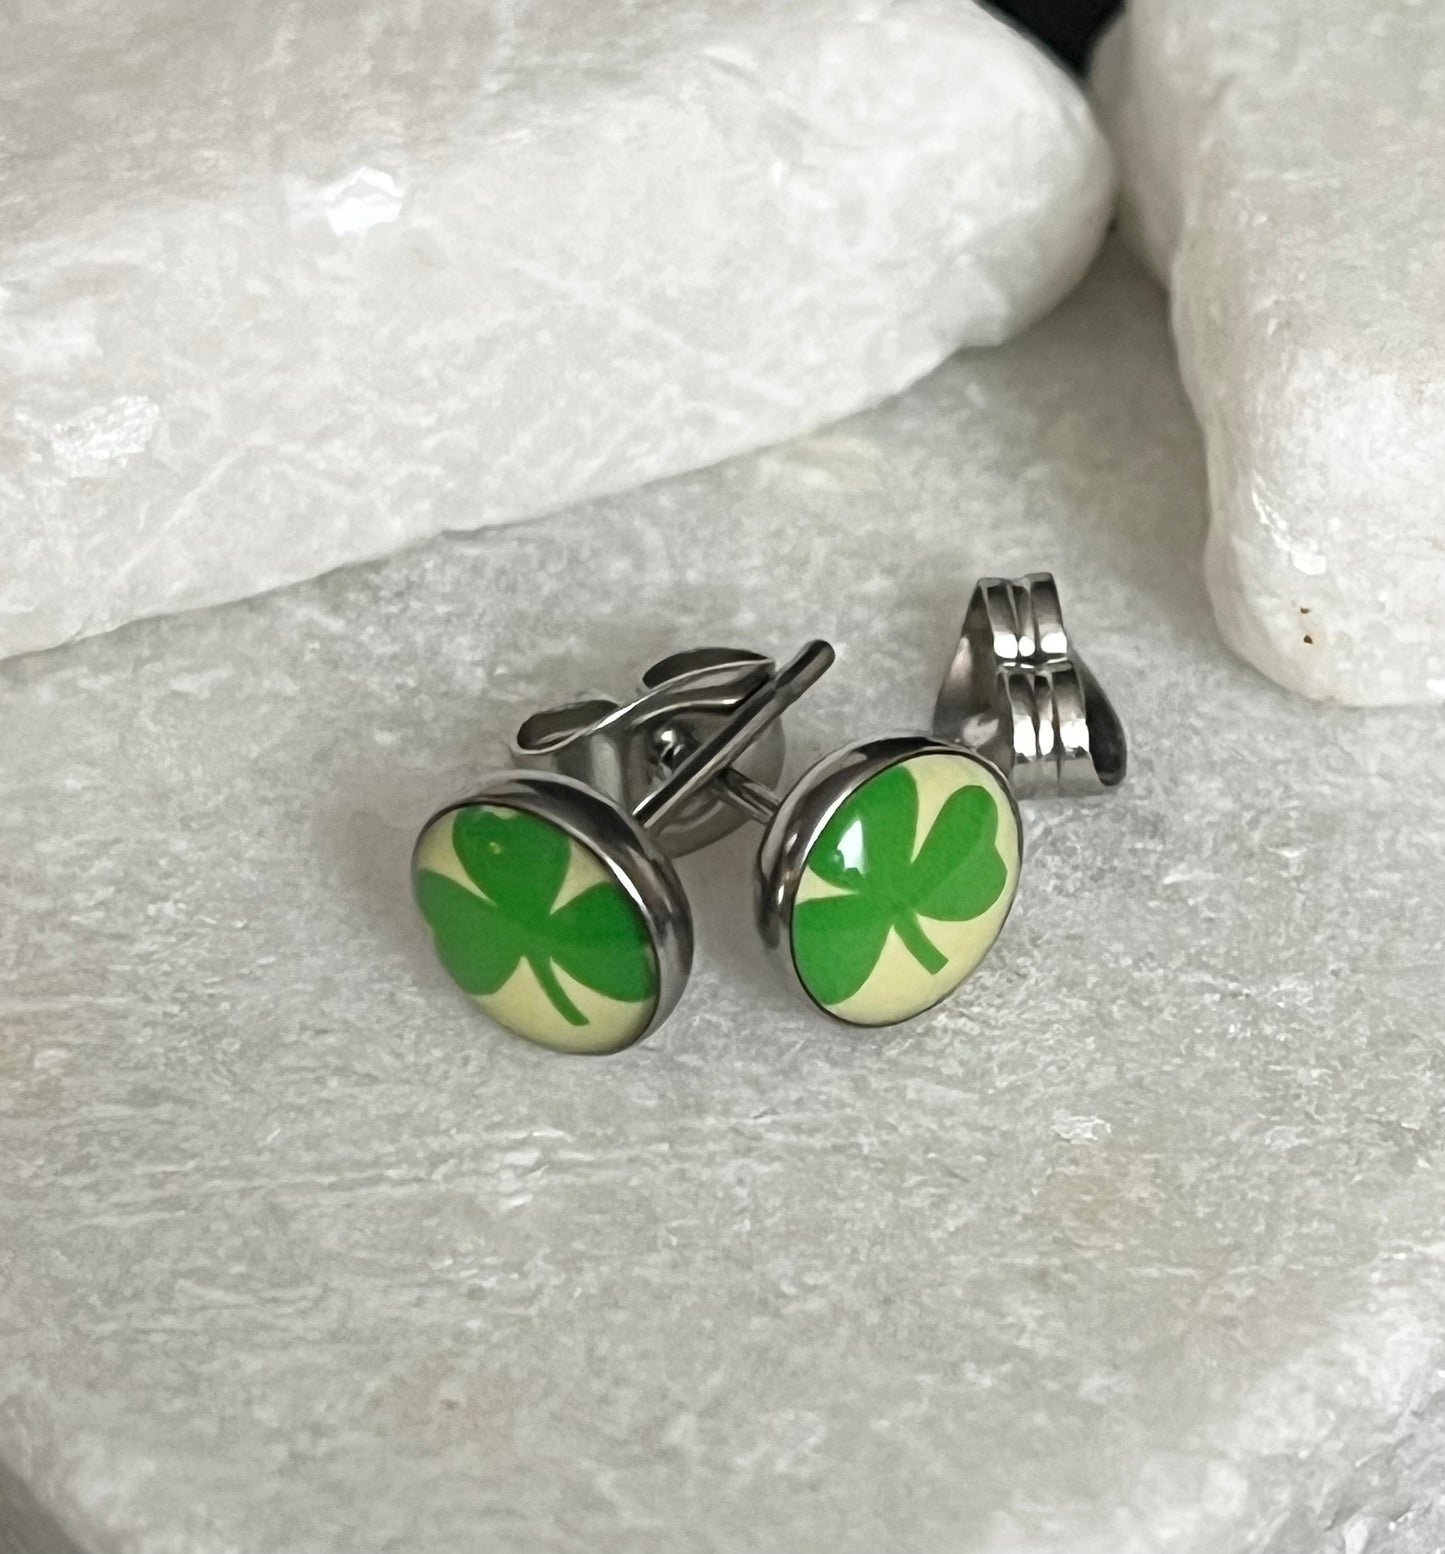 PAIR of Unique Green Shamrock/ Clover 316L Surigical Steel Earrings with Butterfly Back - Saint Patricks - St Patty's Day - 20g Available!